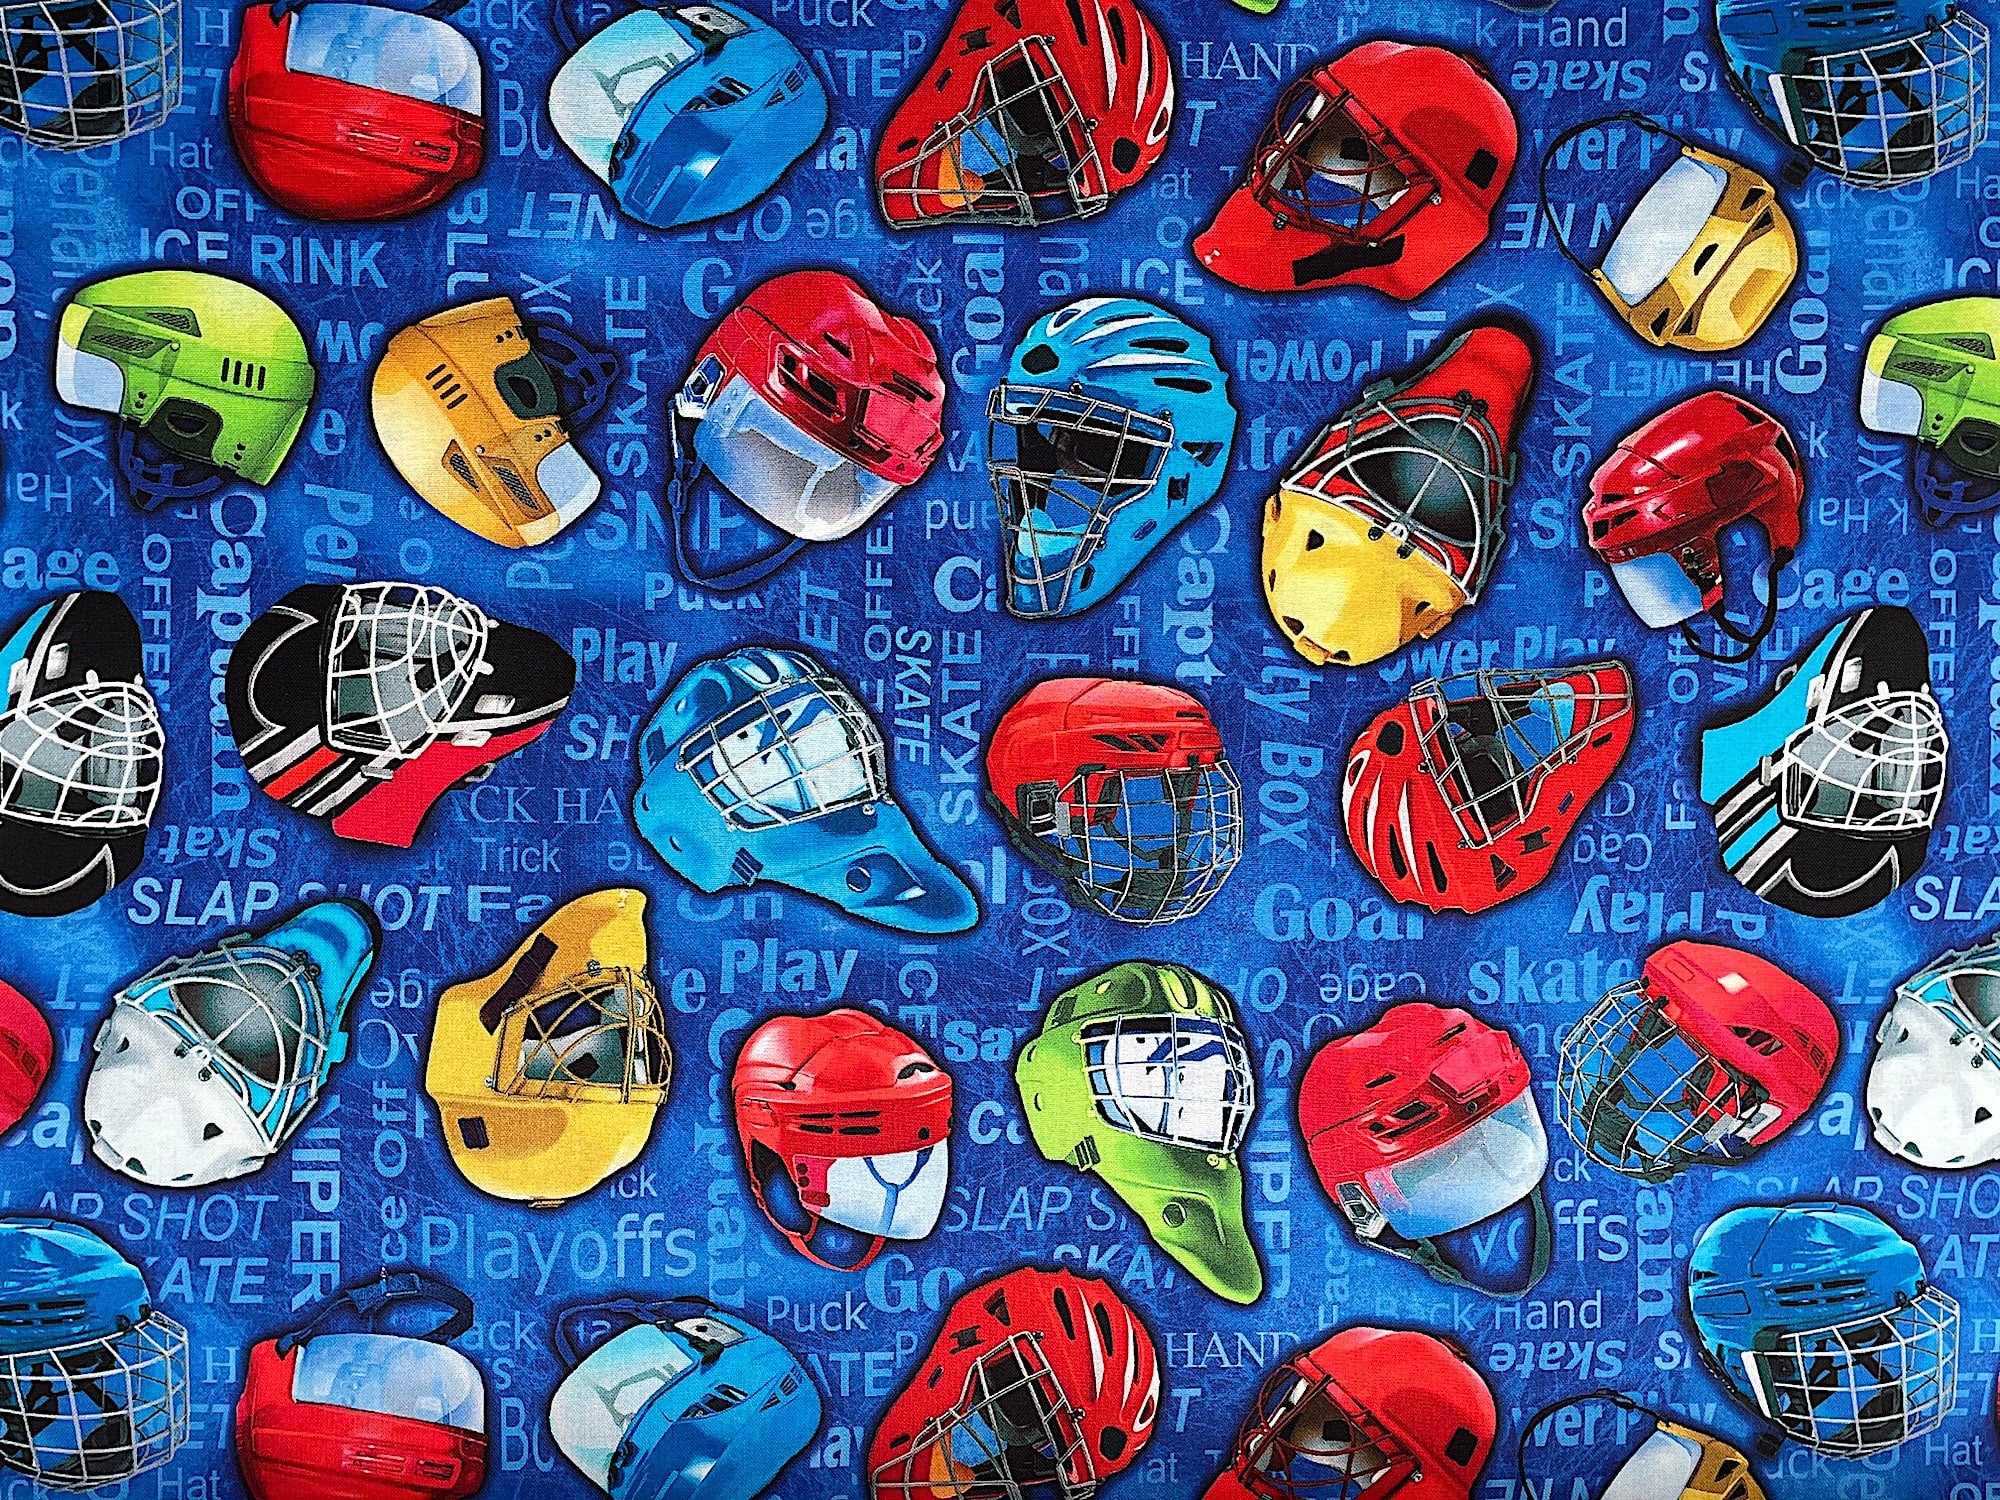 This fabric is part of the Hat Trick collection by Kanvas Studio. This blue cotton fabric is covered with red, blue yellow and green hockey helmets. The background is covered with hockey sayings such as hat, helmet, sniper, goal skate and more.